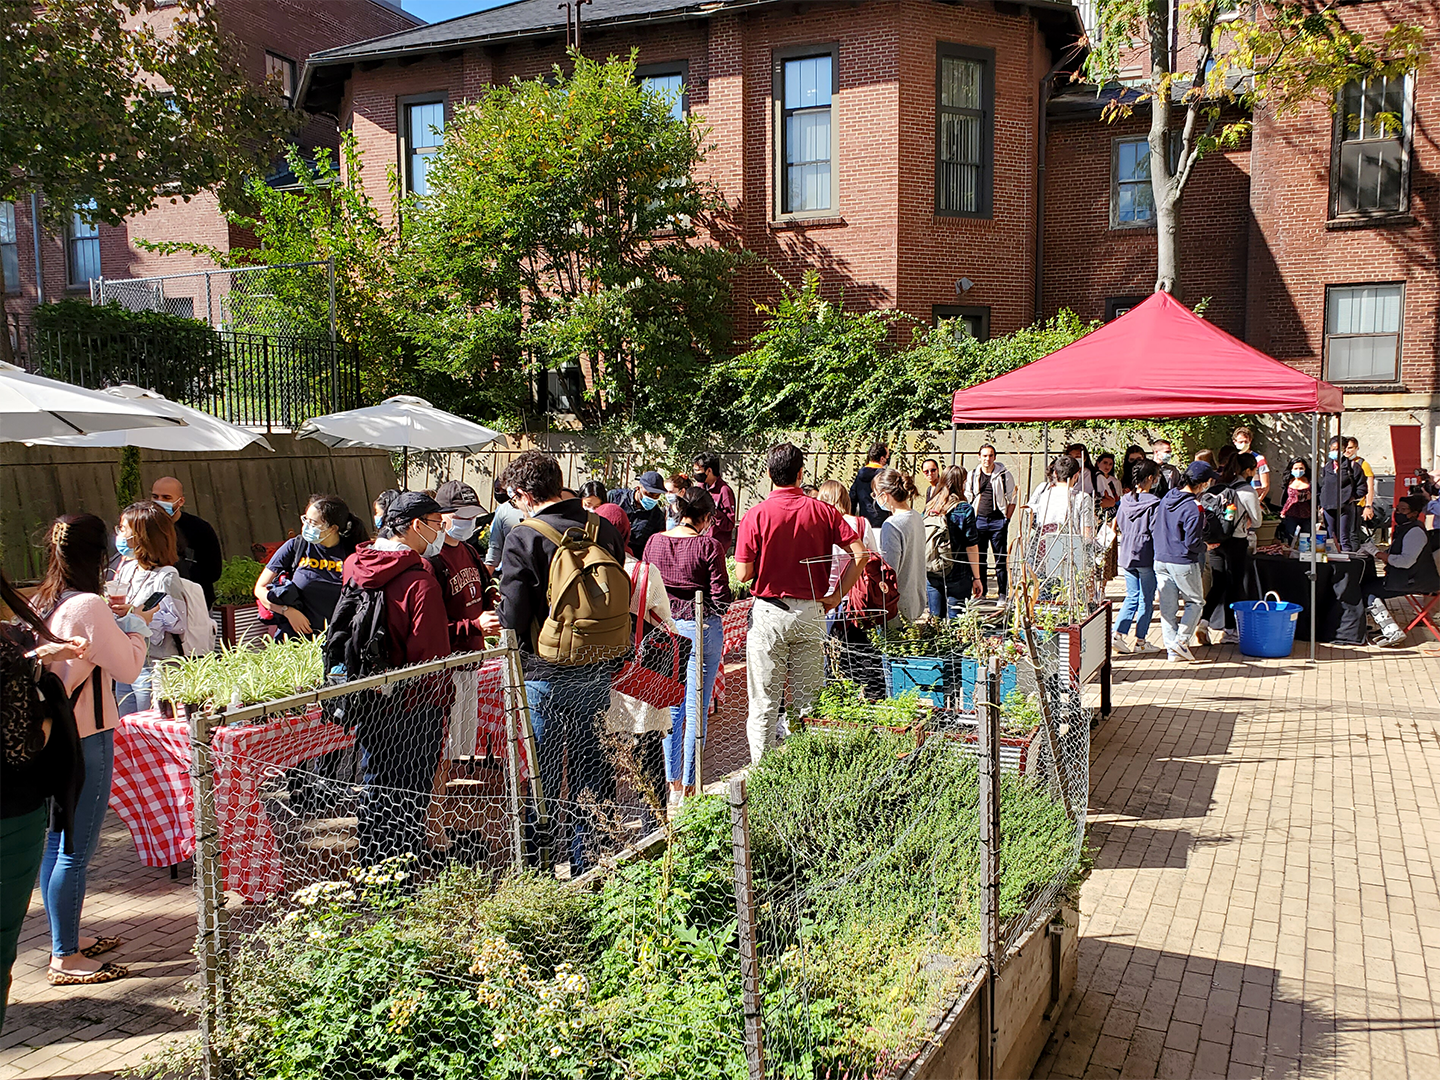 graduate students gathered in the community garden